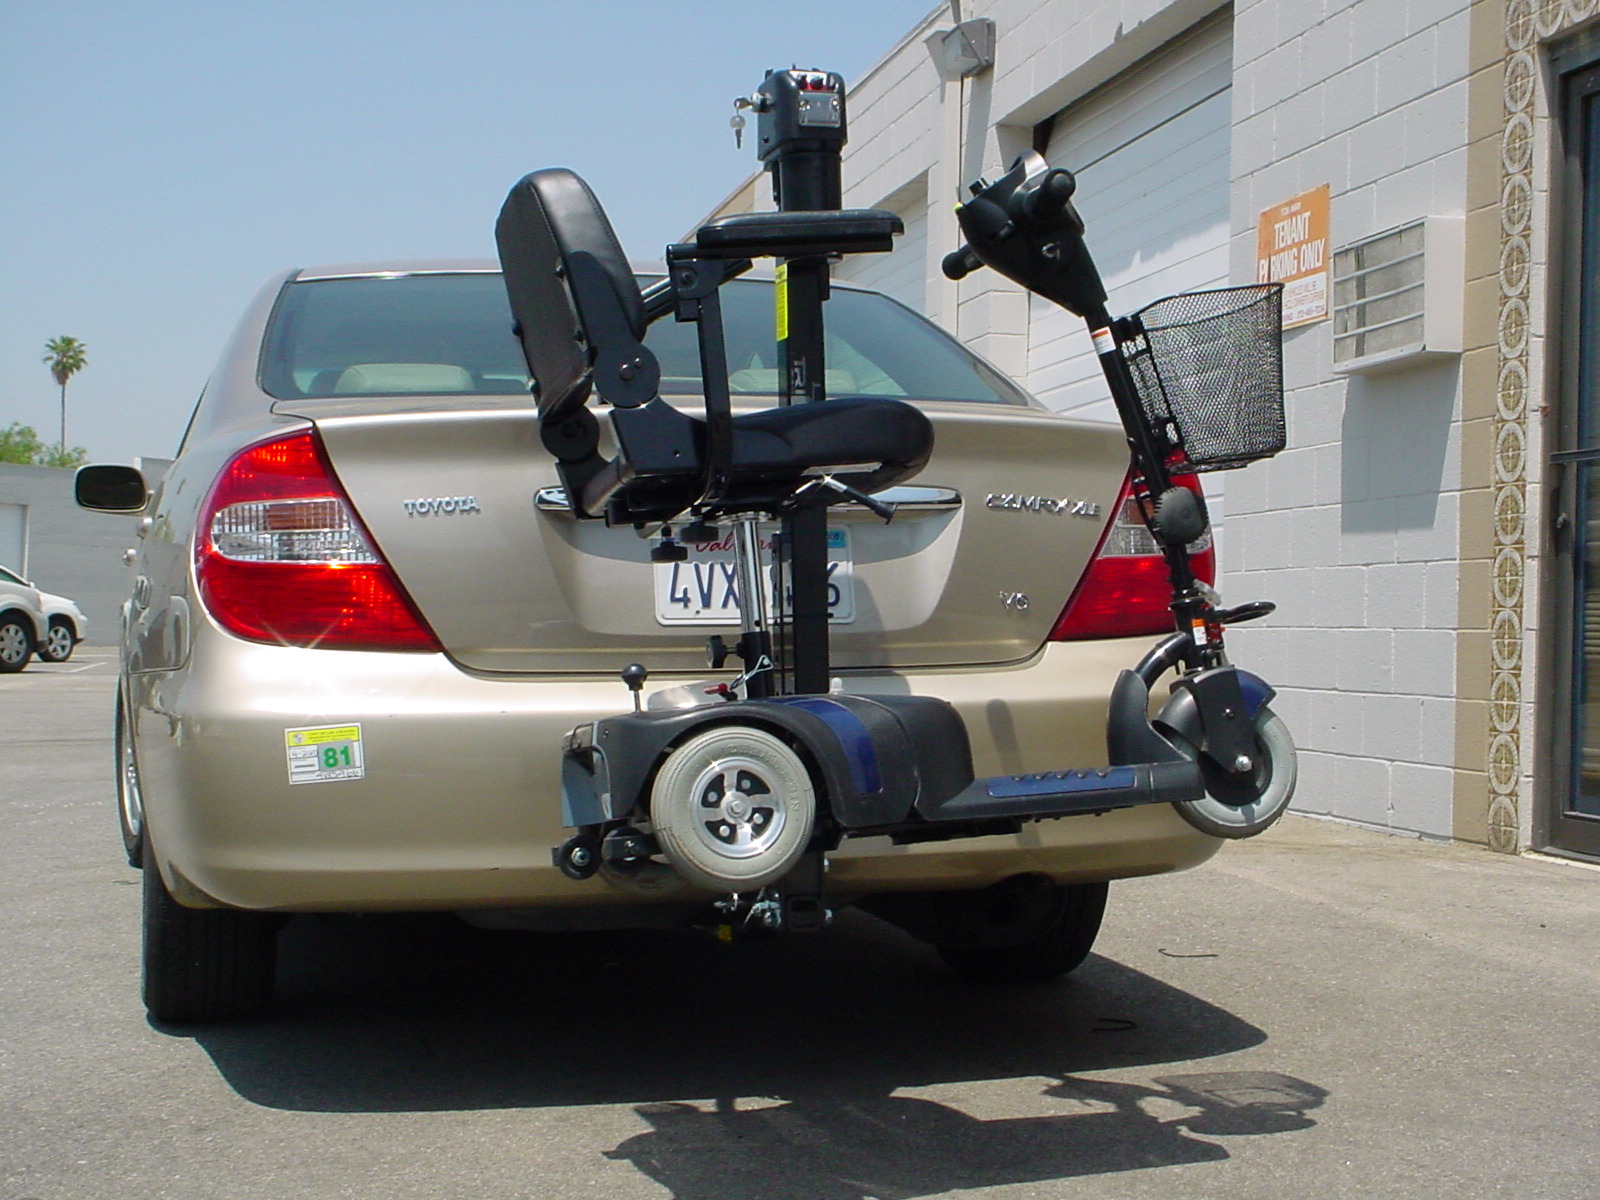 South Gate Scooter & Wheelchair Mobility Lifts class 3 C outside trailer hitch car van truck rv hatchback suv trunk carrier.